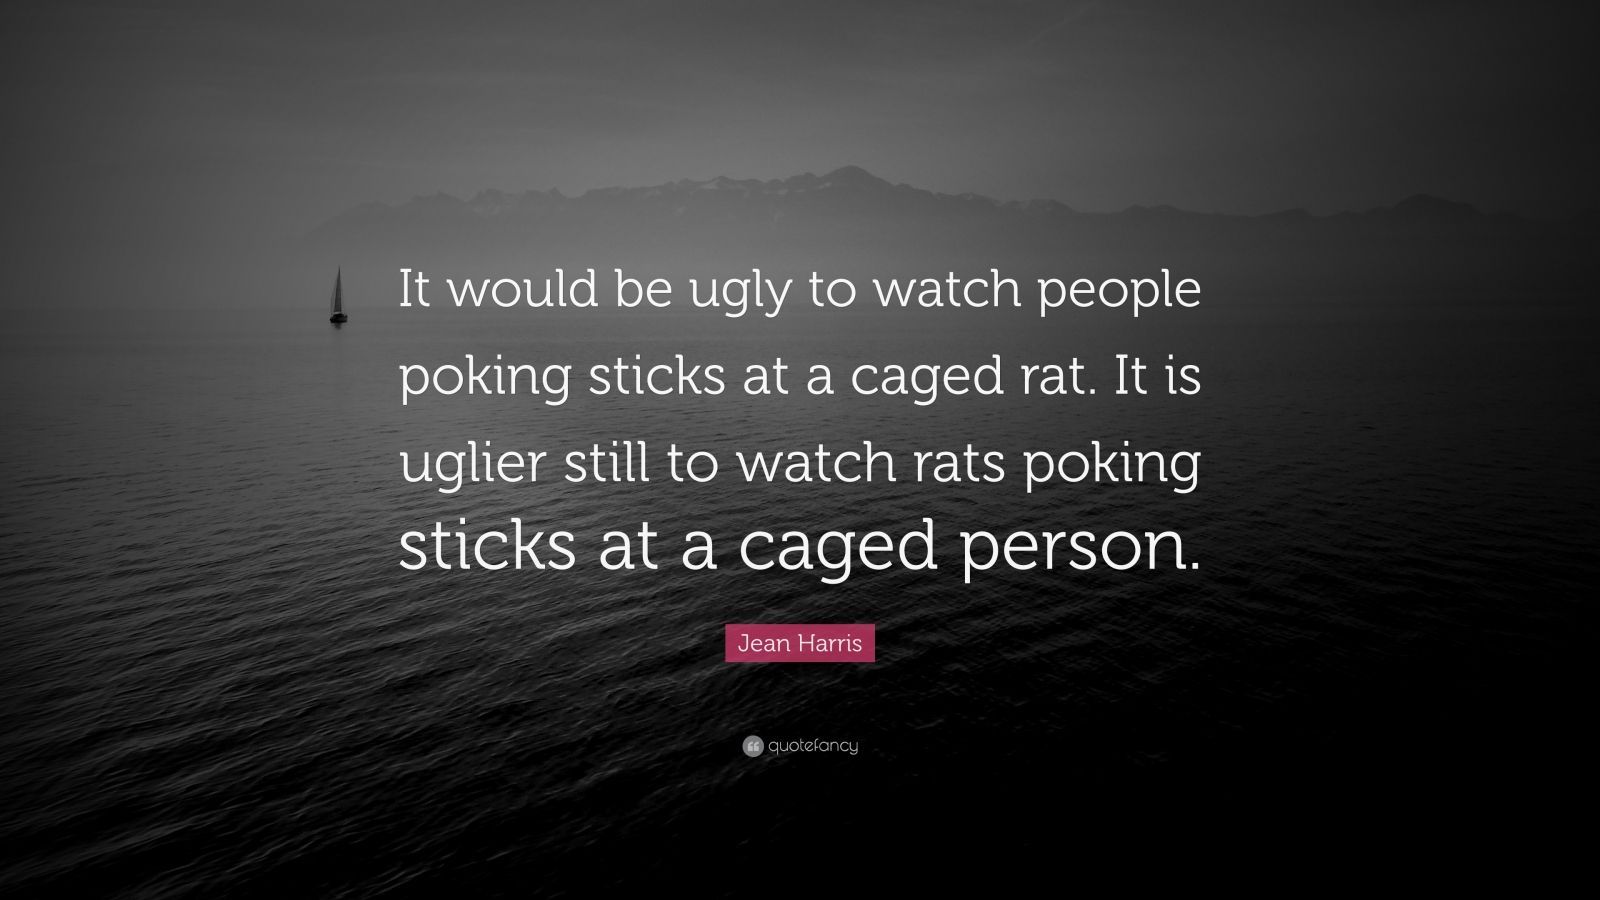 Jean Harris Quote: “It would be ugly to watch people poking sticks